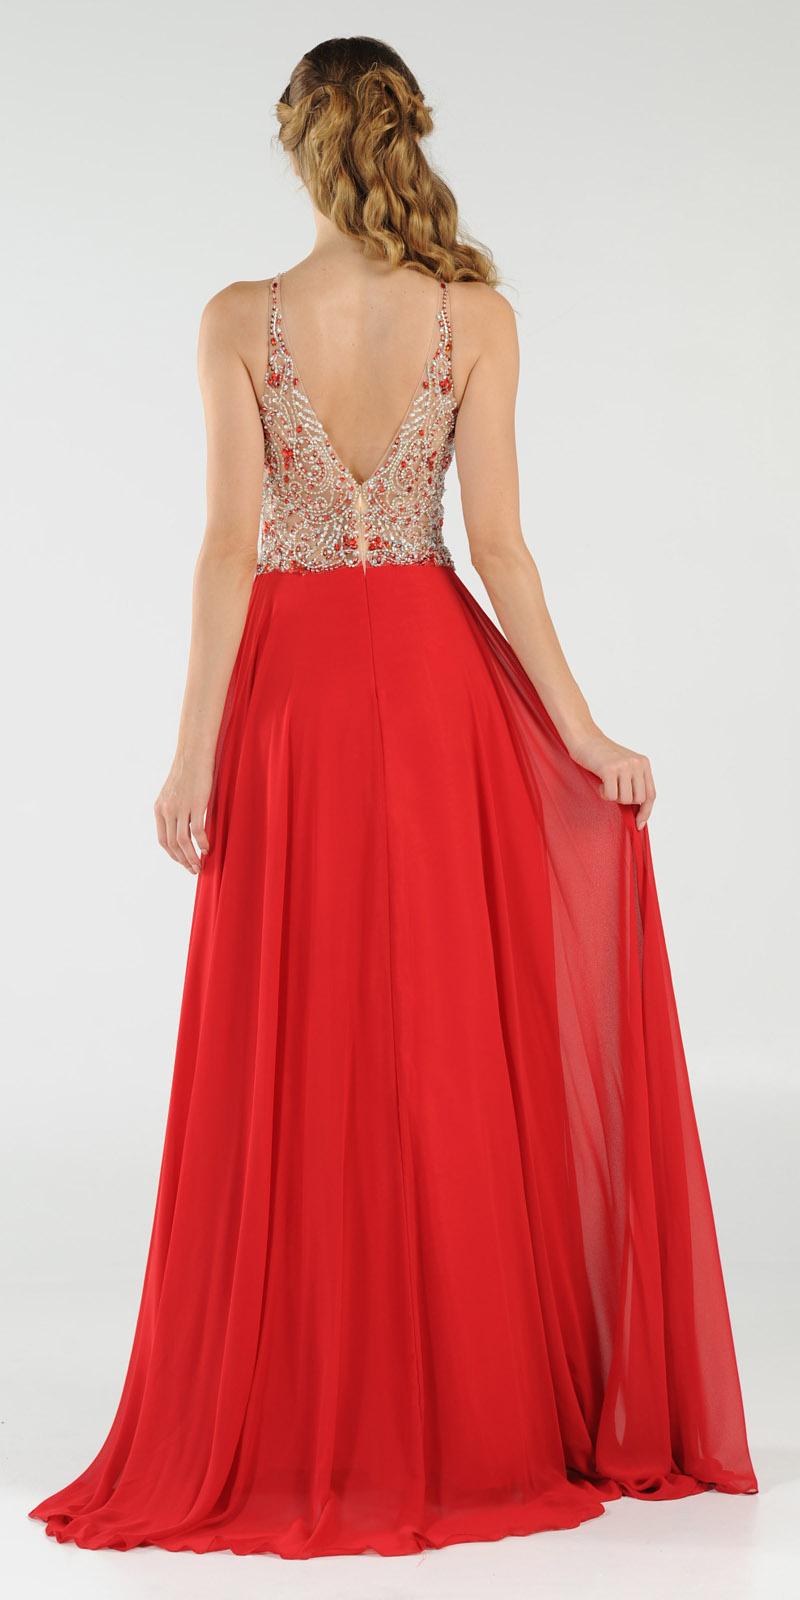 Poly USA 7826 - Halter Beaded Bodice A-Line Chiffon Long Prom Dress Red Back View